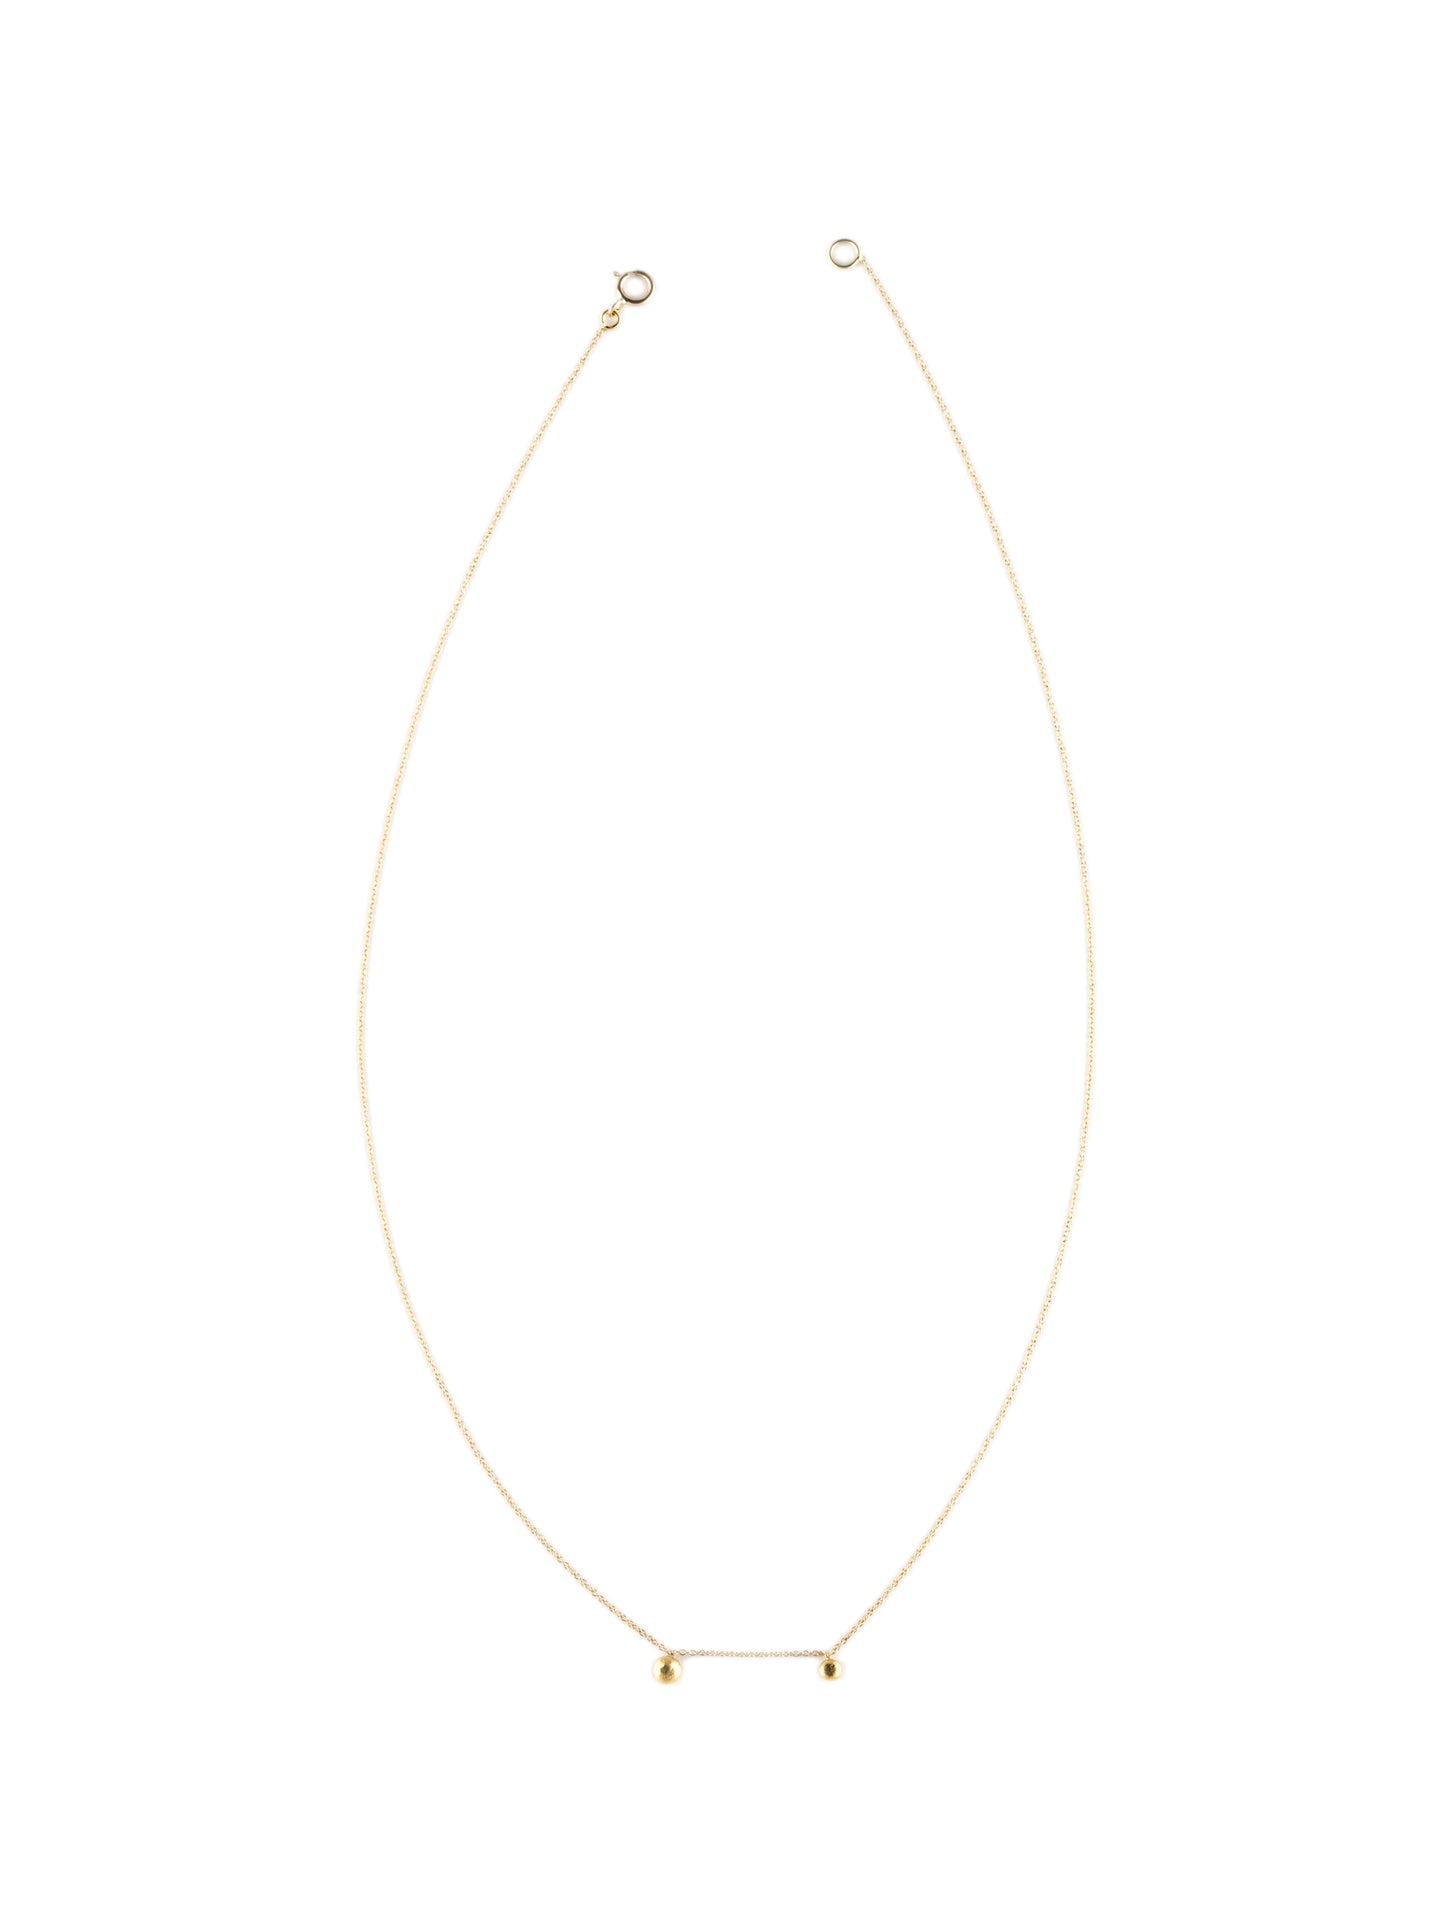 TWO GOLD NUGGETS NECKLACE